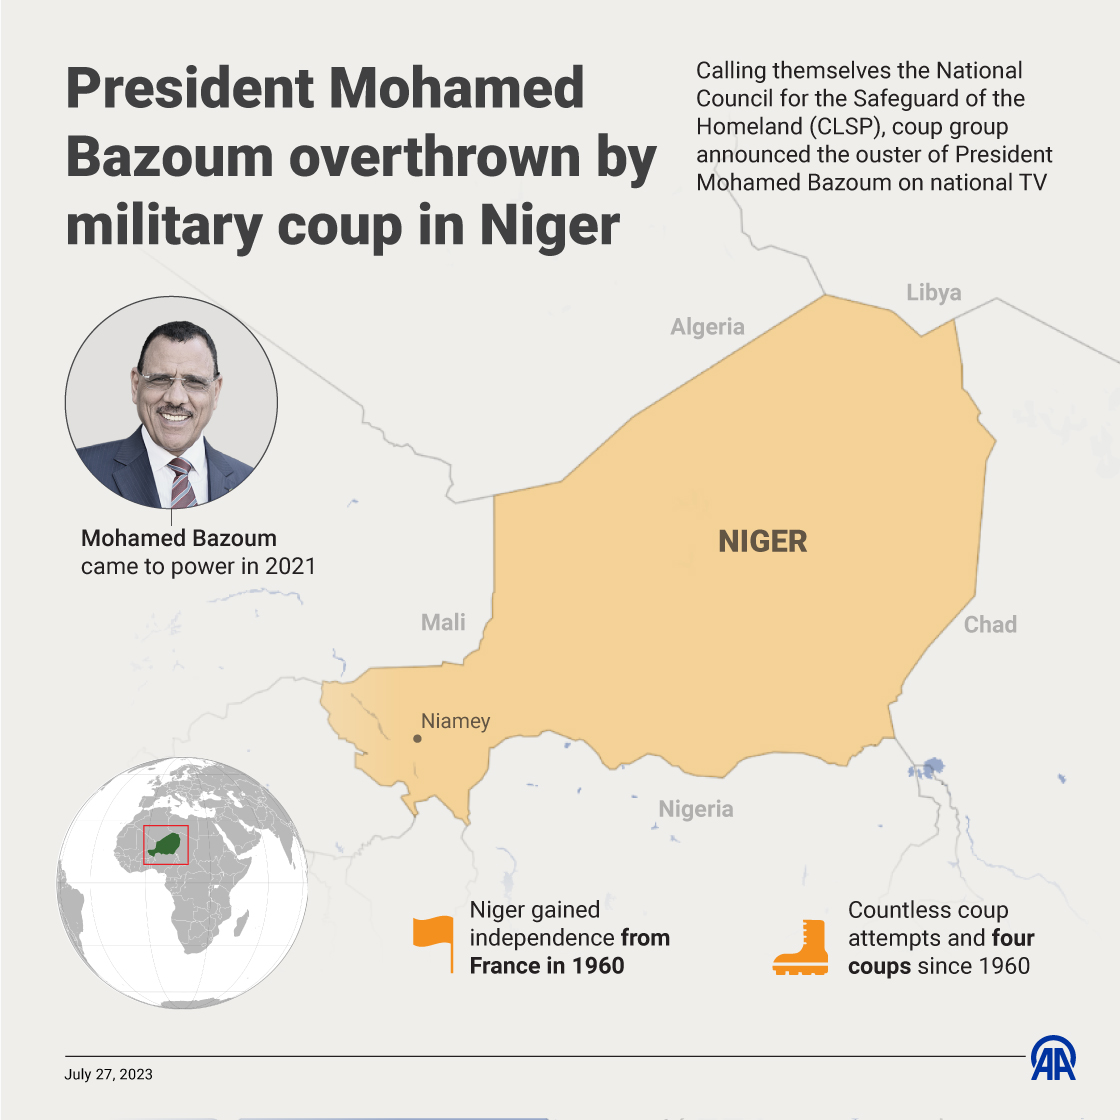 President Mohamed Bazoum overthrown by military coup in Niger